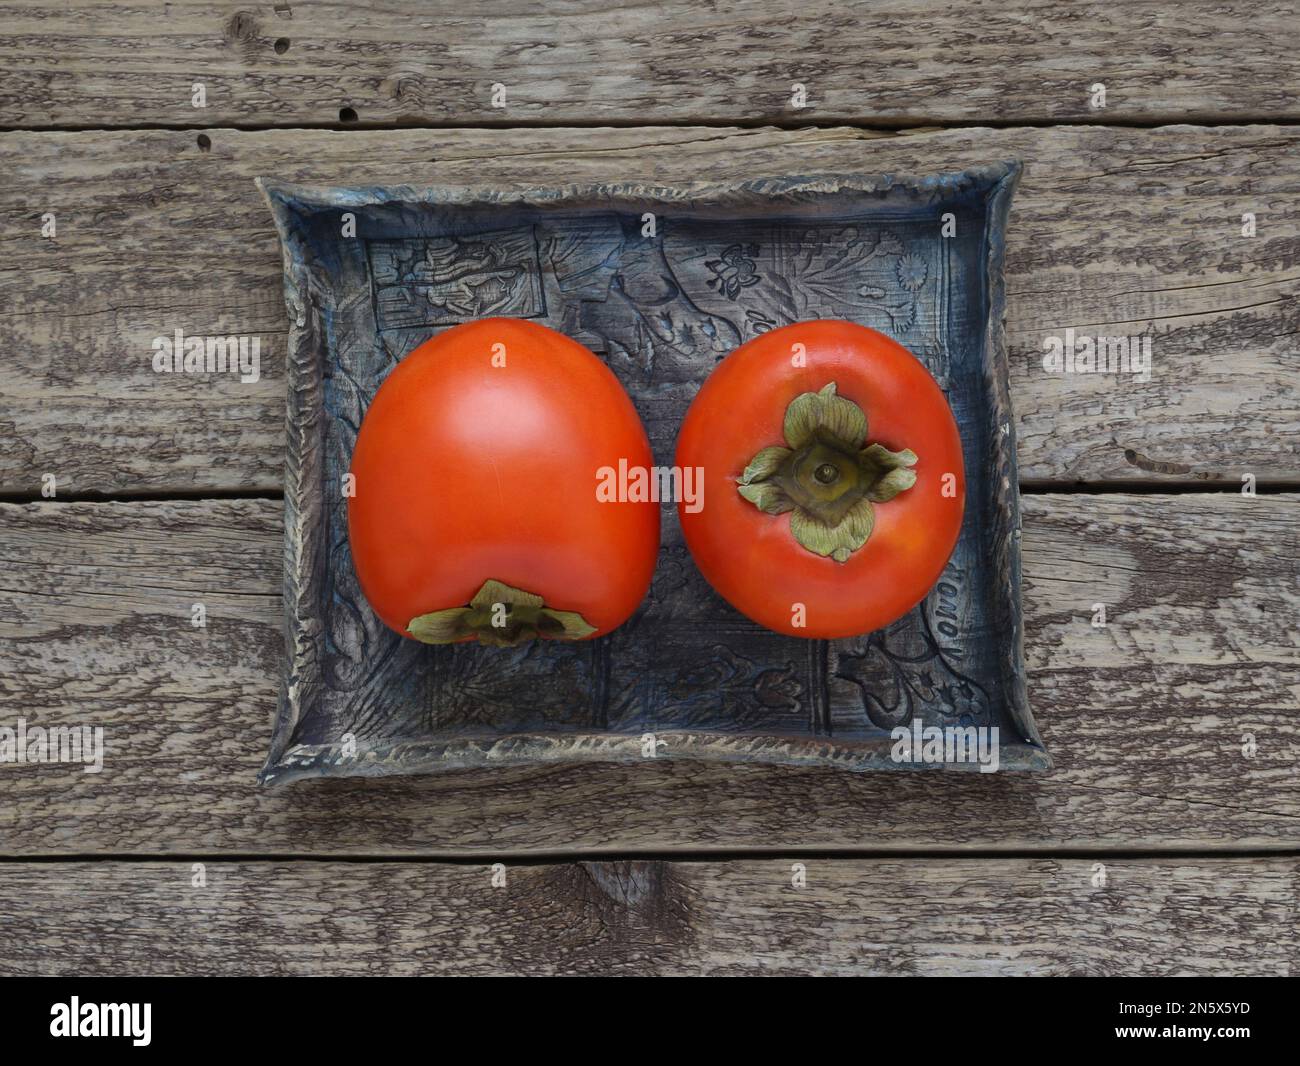 Persimmon fruits on blue ceramic tray on wooden background, close up table top view. Detailed photo of kaki fruit with leaf, photo directly  above. Stock Photo